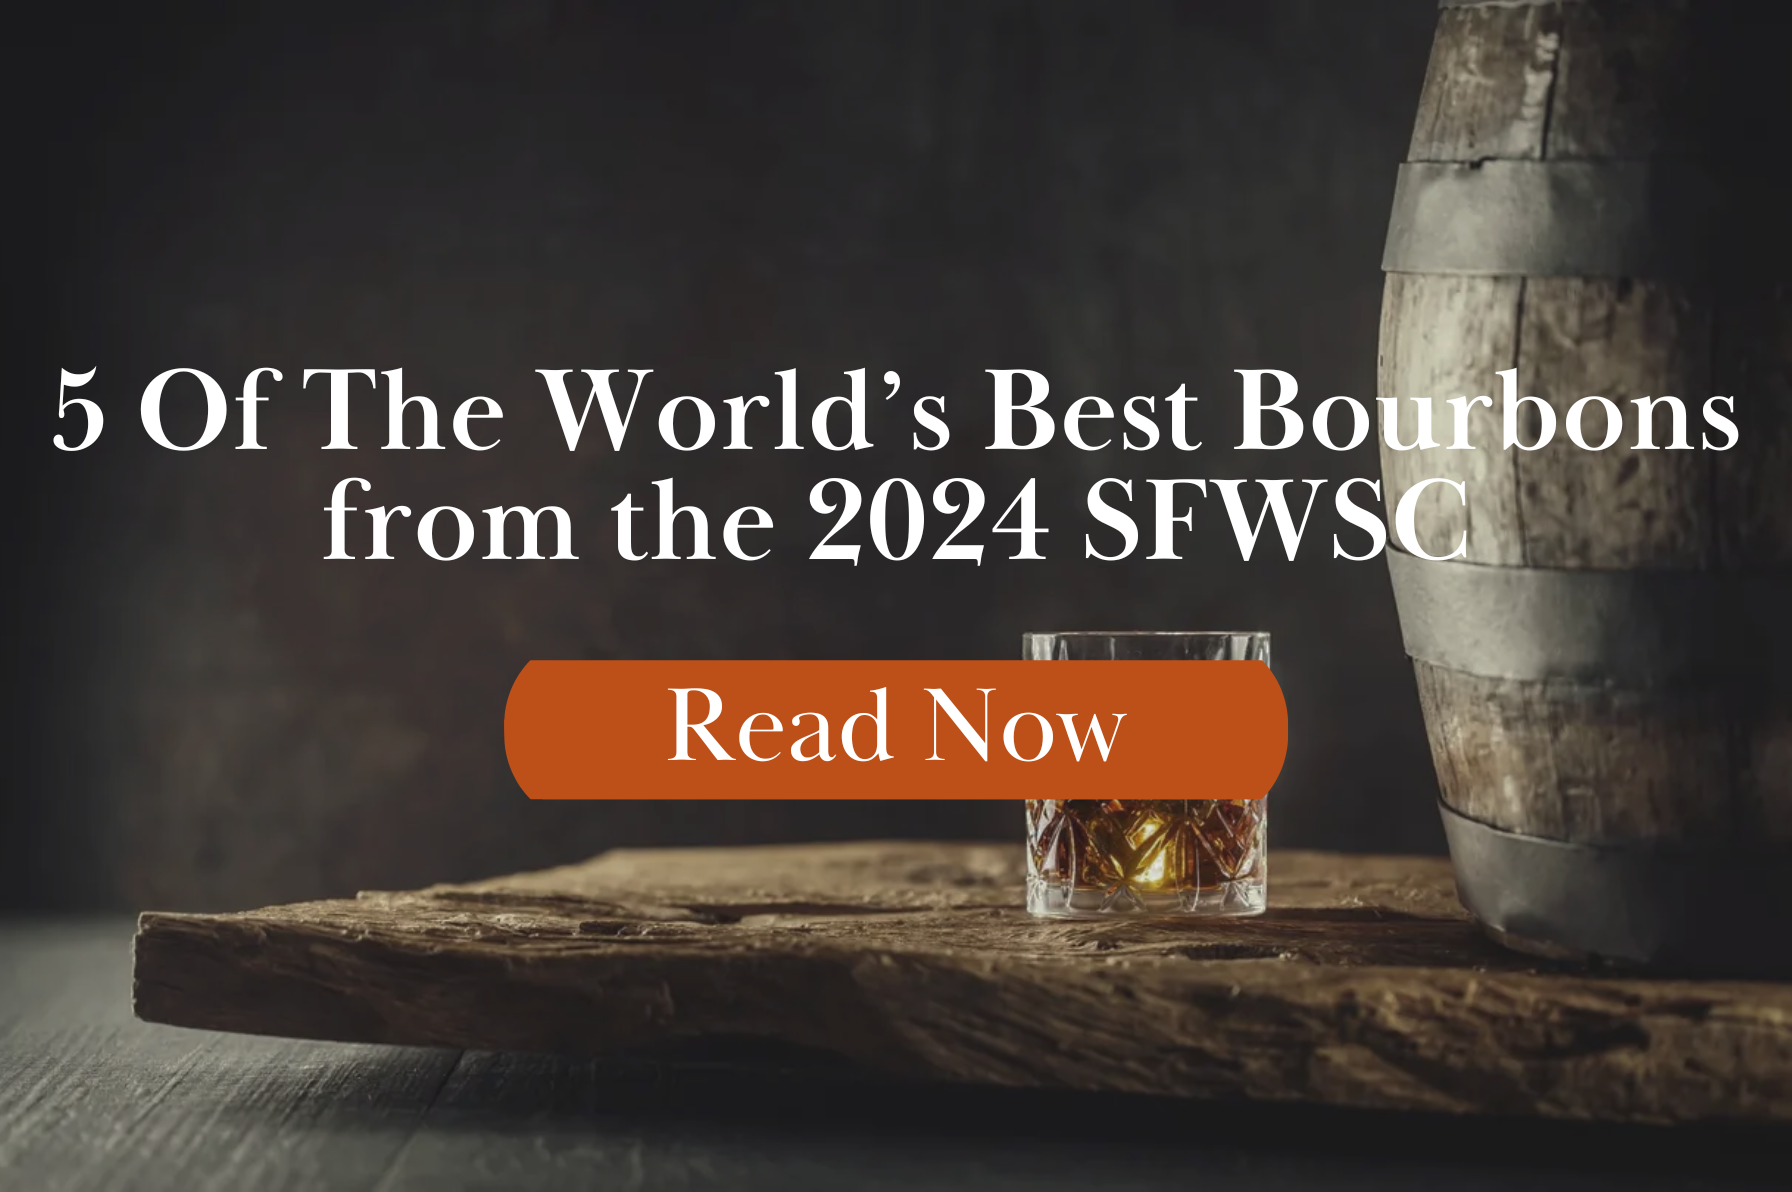 5 of the World's Best Bourbons According to the 2024 SFWSC